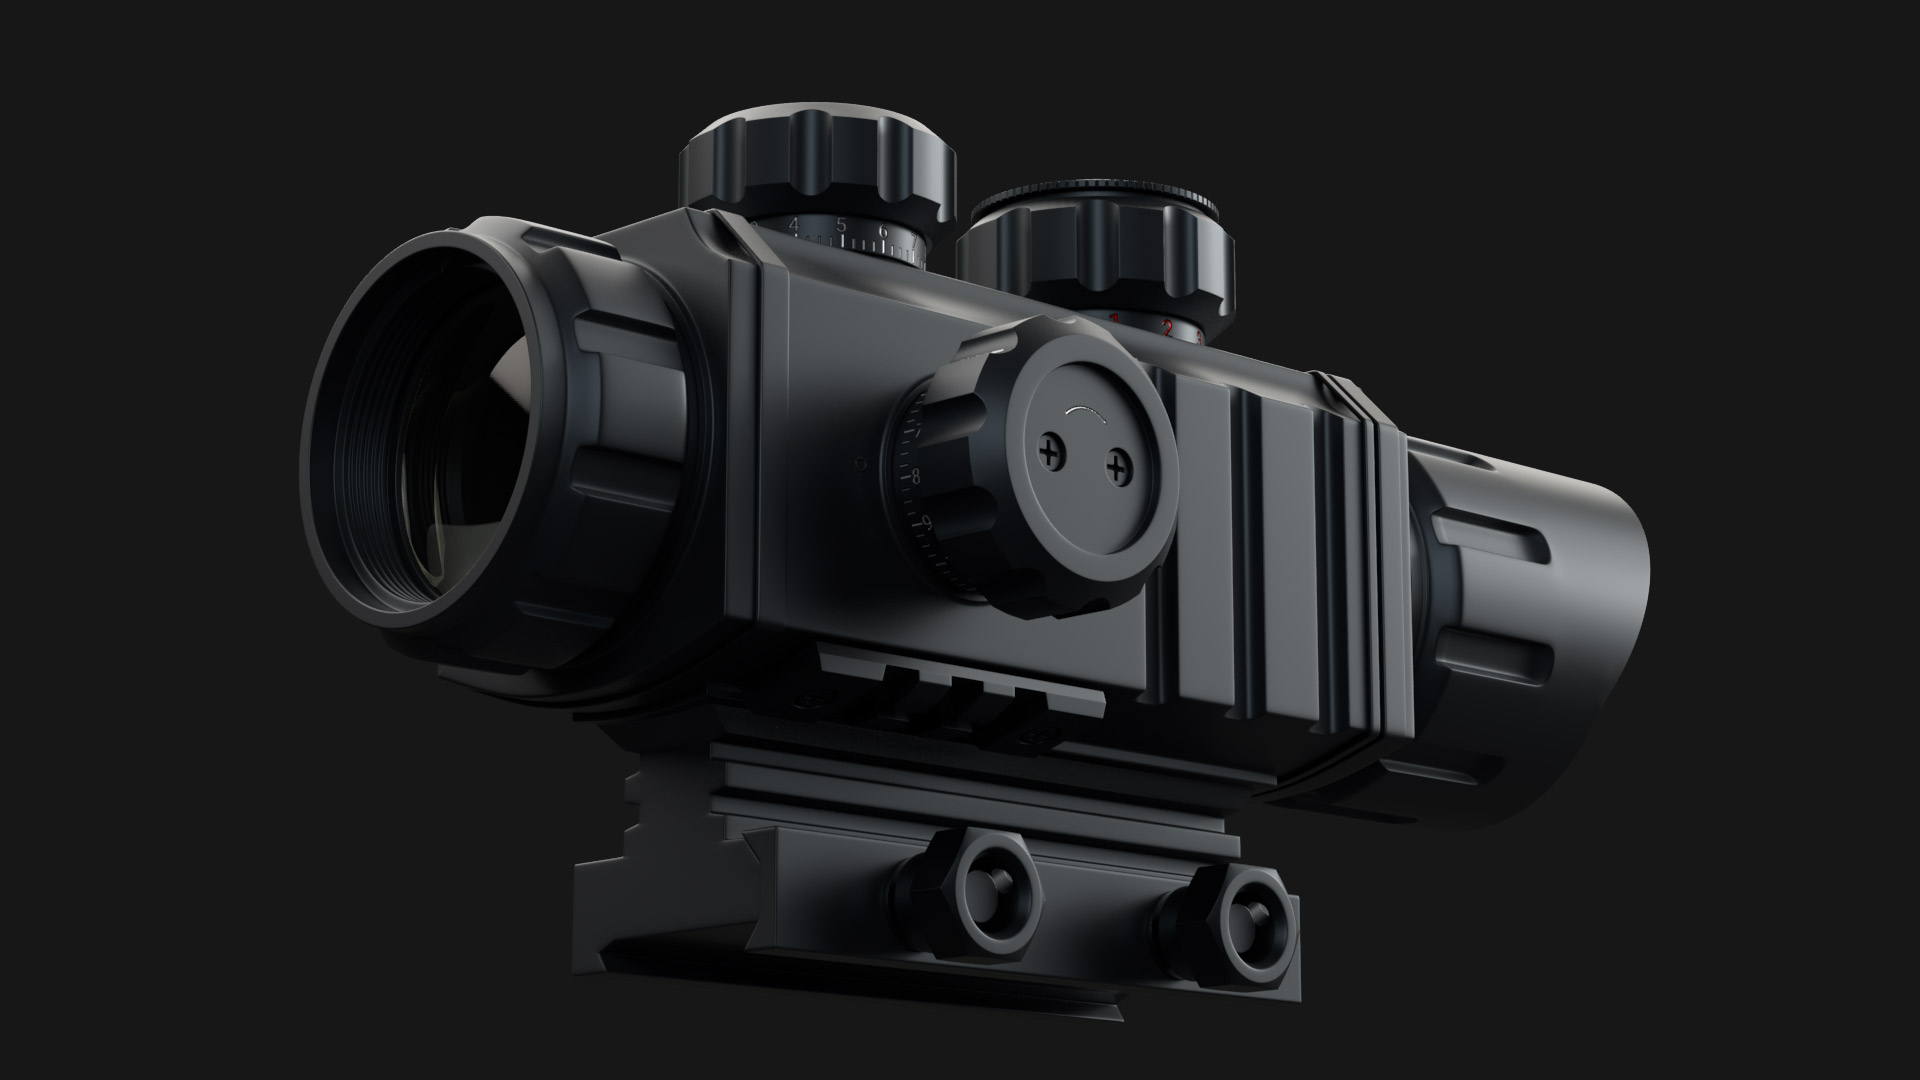 Store - 3D Model of a Rifle Scope - Right Side Back View